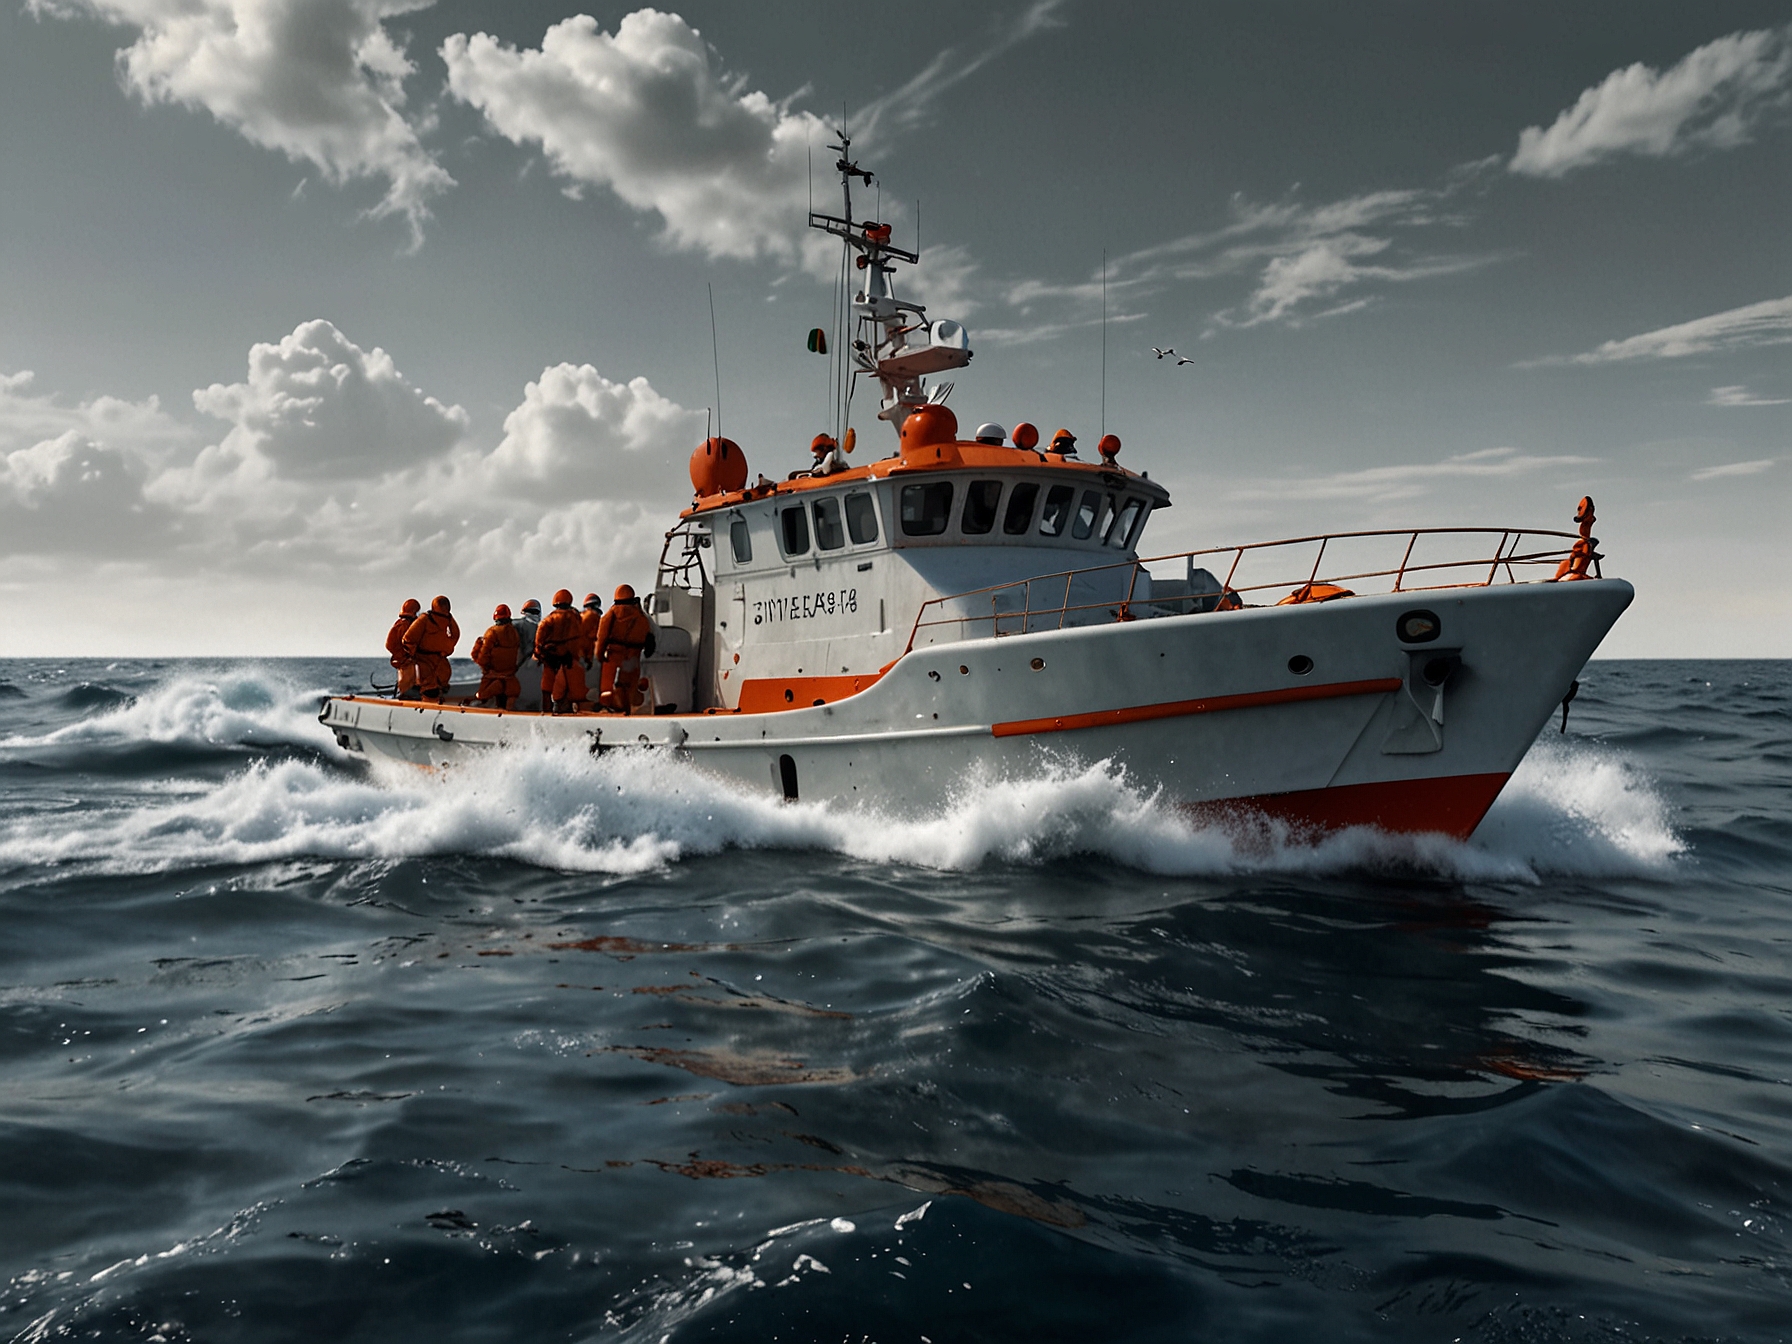 Italian coast guard personnel conducting a search and rescue operation in the Ionian Sea, navigating rough waters in an effort to locate the missing victims of the recent shipwreck.